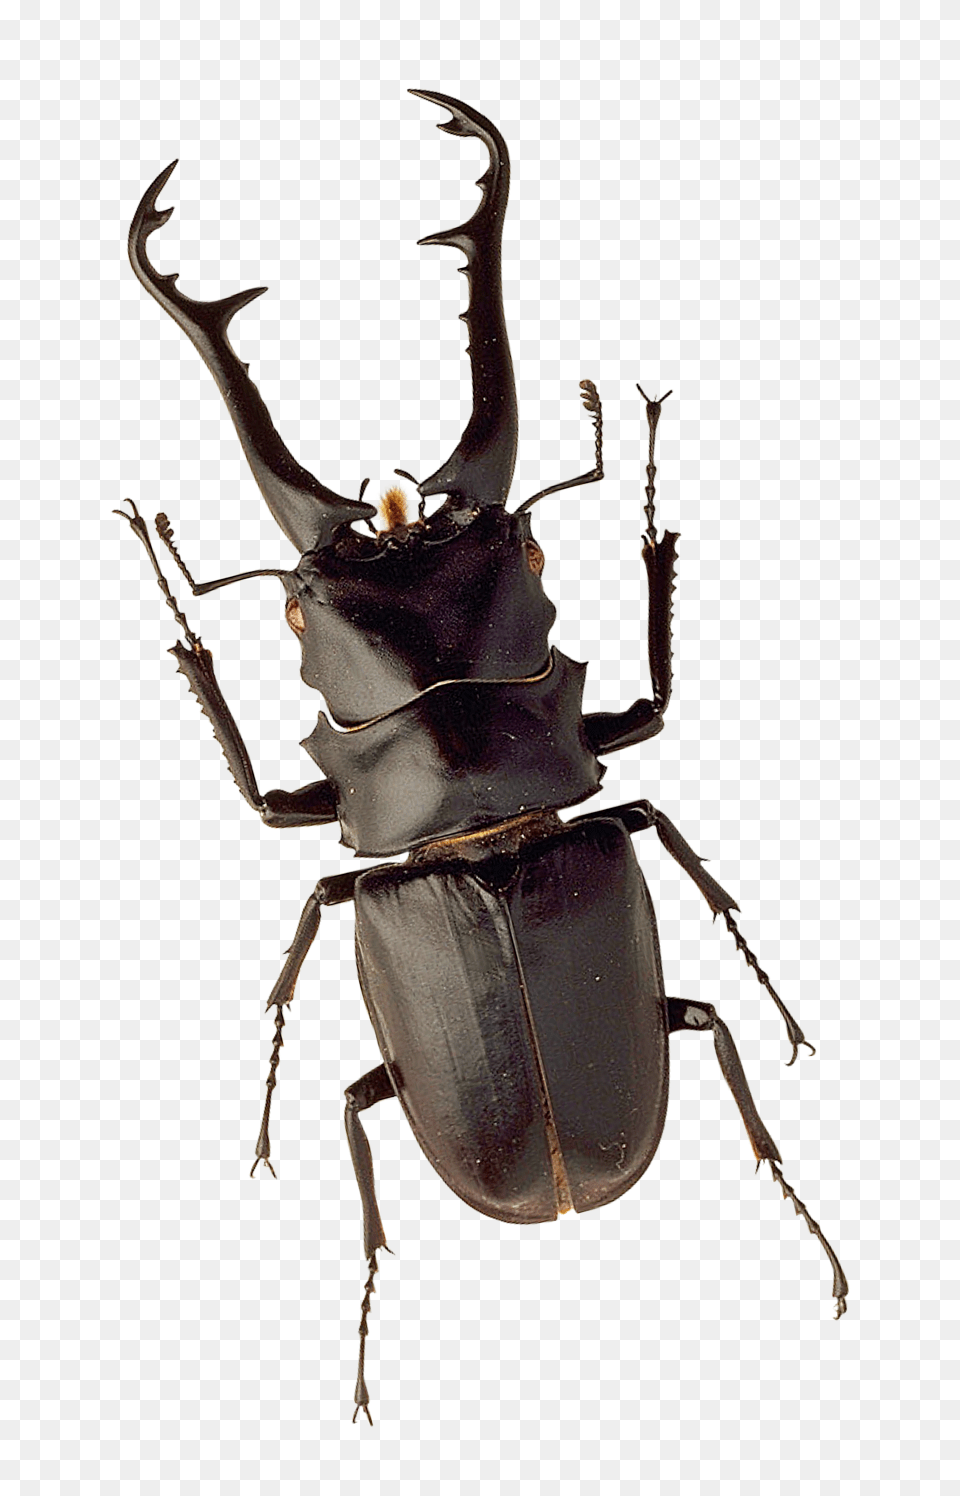 Pngpix Com Insect Image, Animal, Adult, Female, Person Png